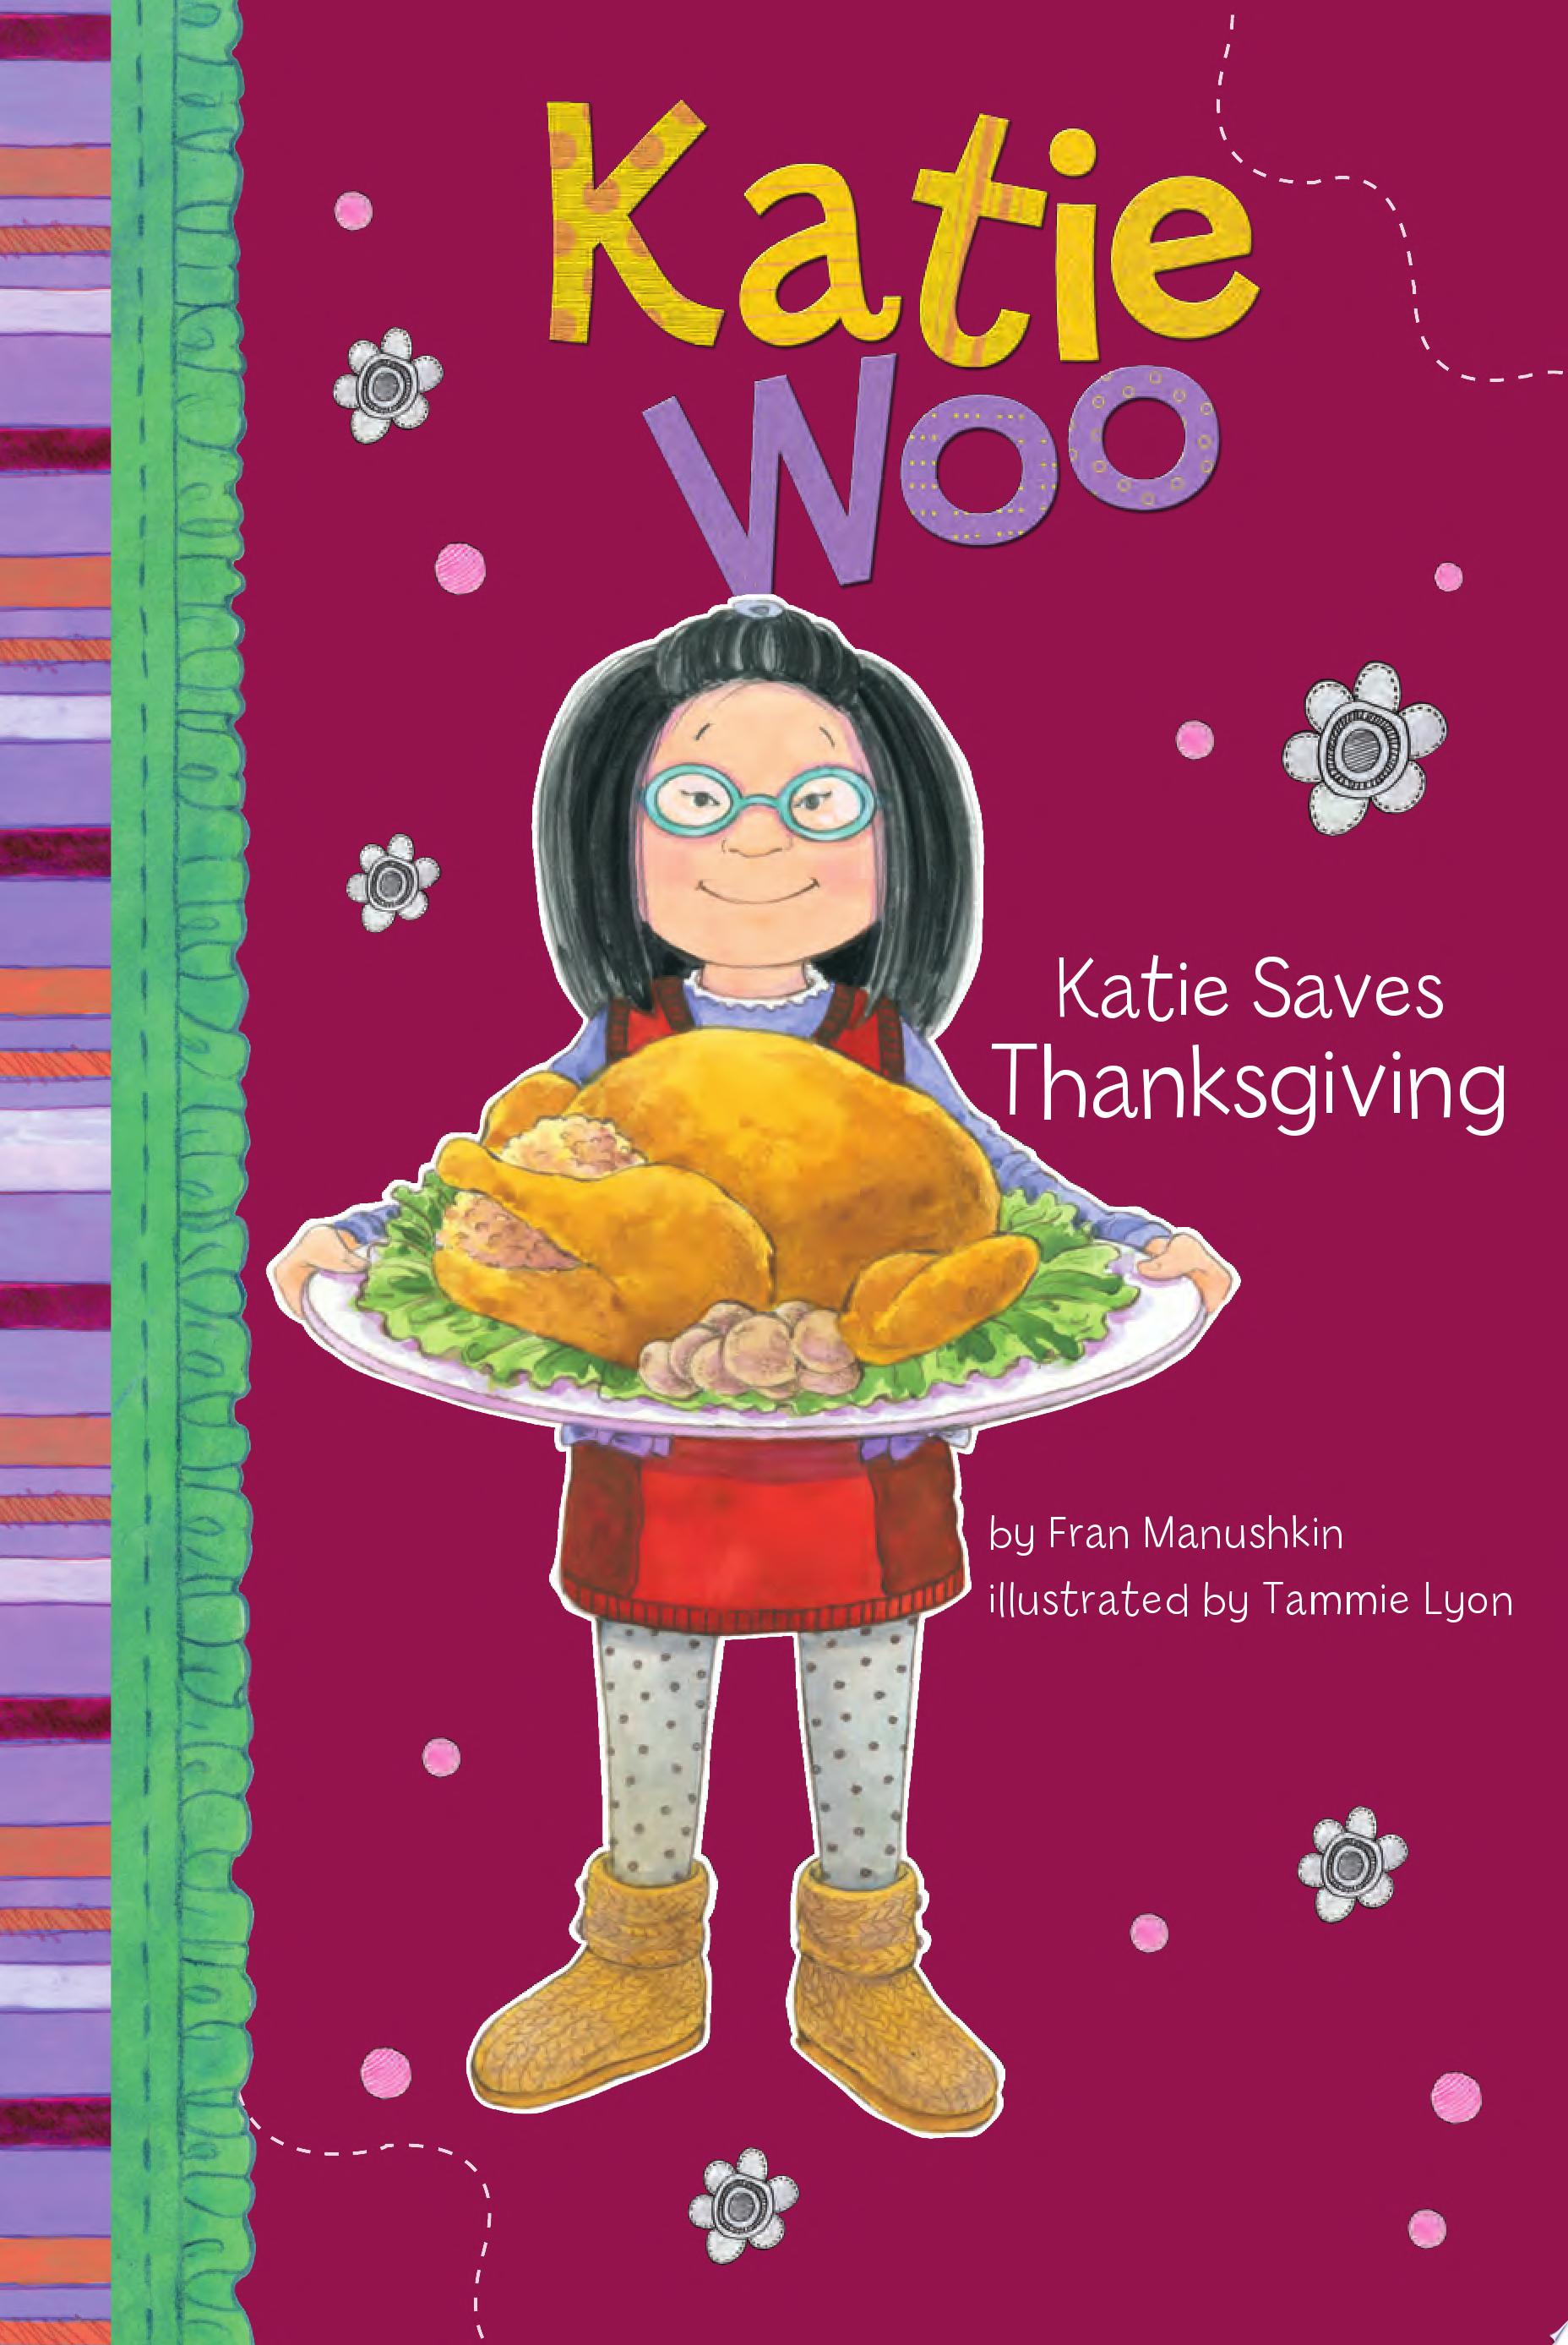 Image for "Katie Saves Thanksgiving"